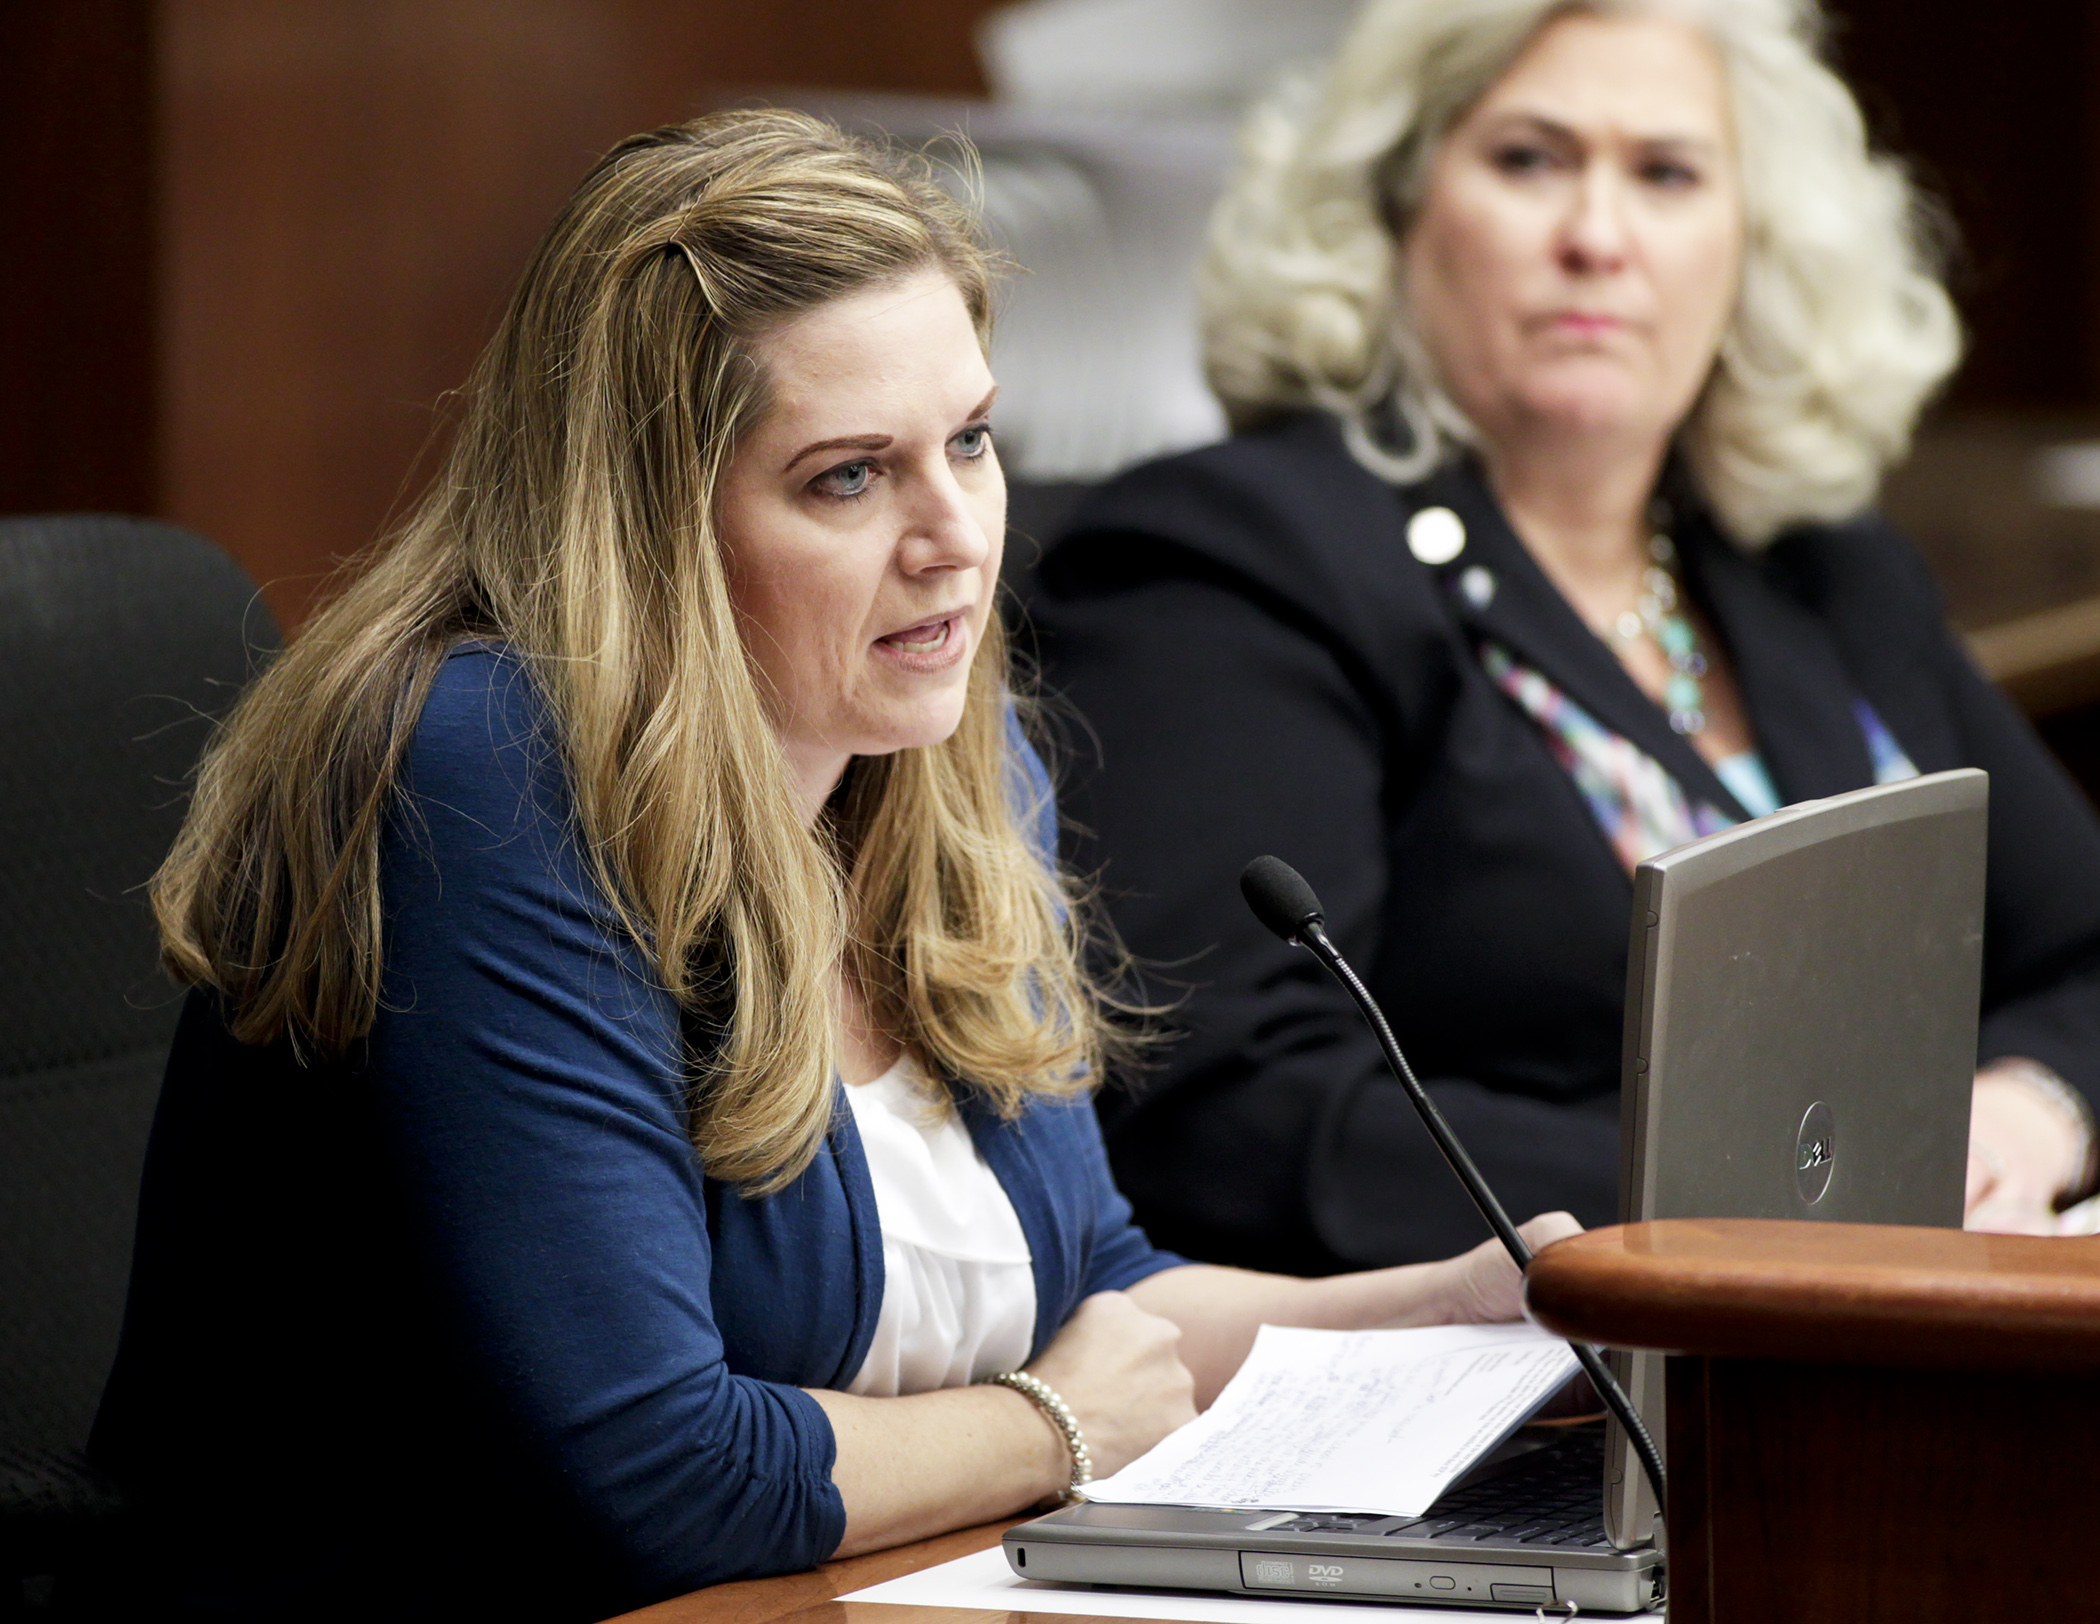 Melissa Sirek, the mother of three children with autism, testifies before the House Education Finance Committee for HF1529, sponsored by Rep. Kelly Fenton, right, to create education savings accounts for students with special needs. Photo by Paul Battaglia